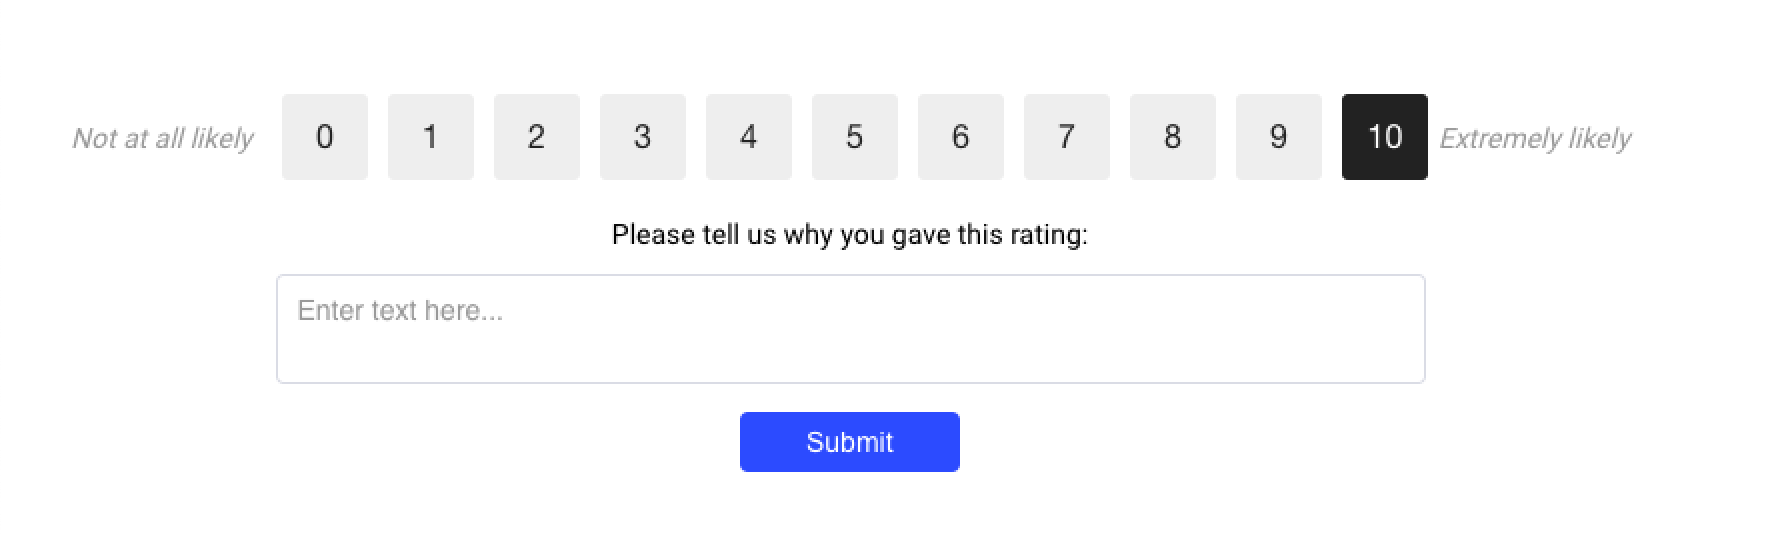 An NPS survey question asking customers 'On a scale of 1 to 10, how likely are you to recommend our product to a friend or colleague?' with a follow up 'Please tell us why you gave us this rating.'